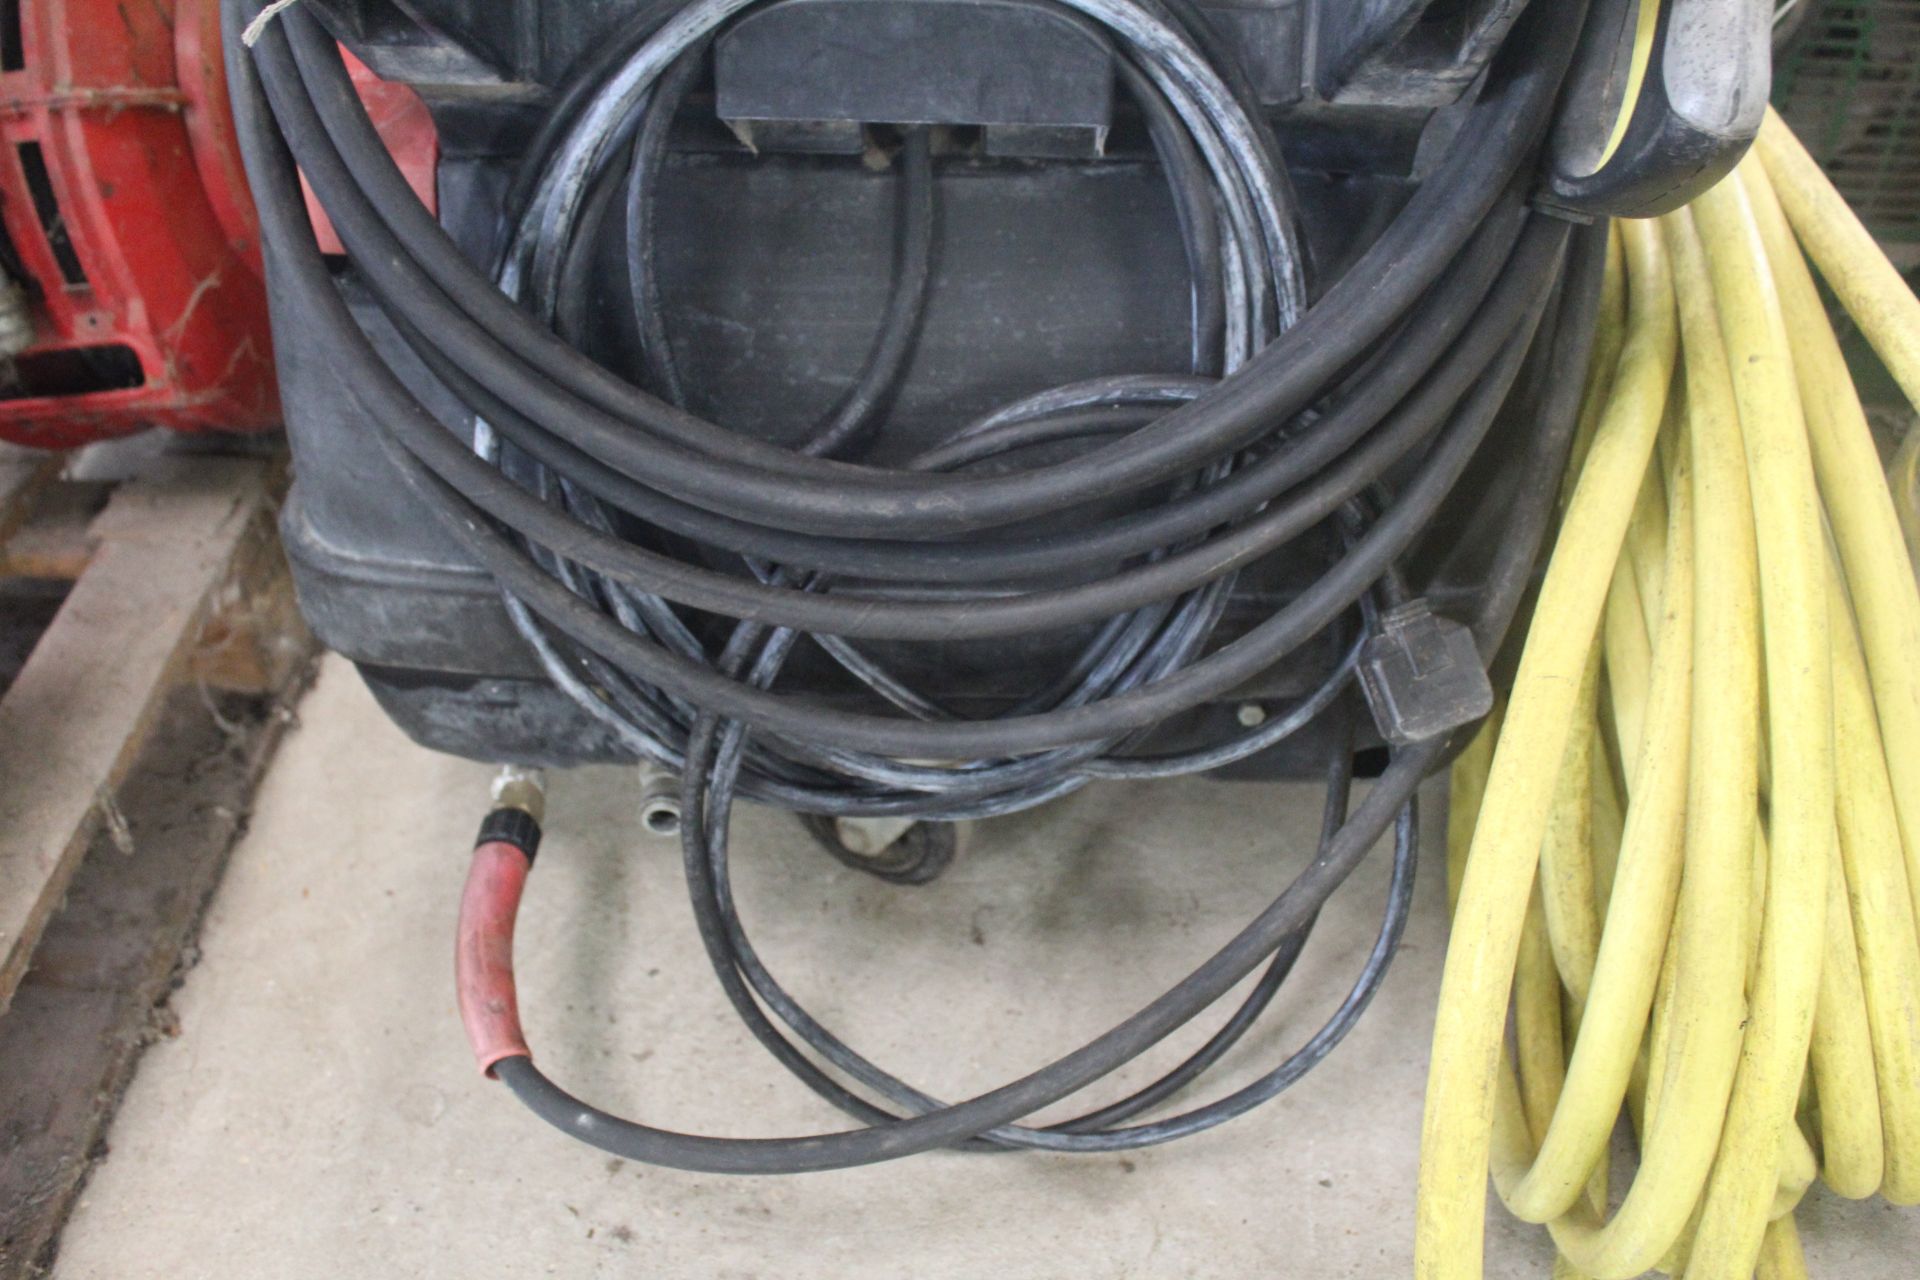 Karcher steam cleaner. With long hose. Recently serviced. Manual held. - Image 10 of 17